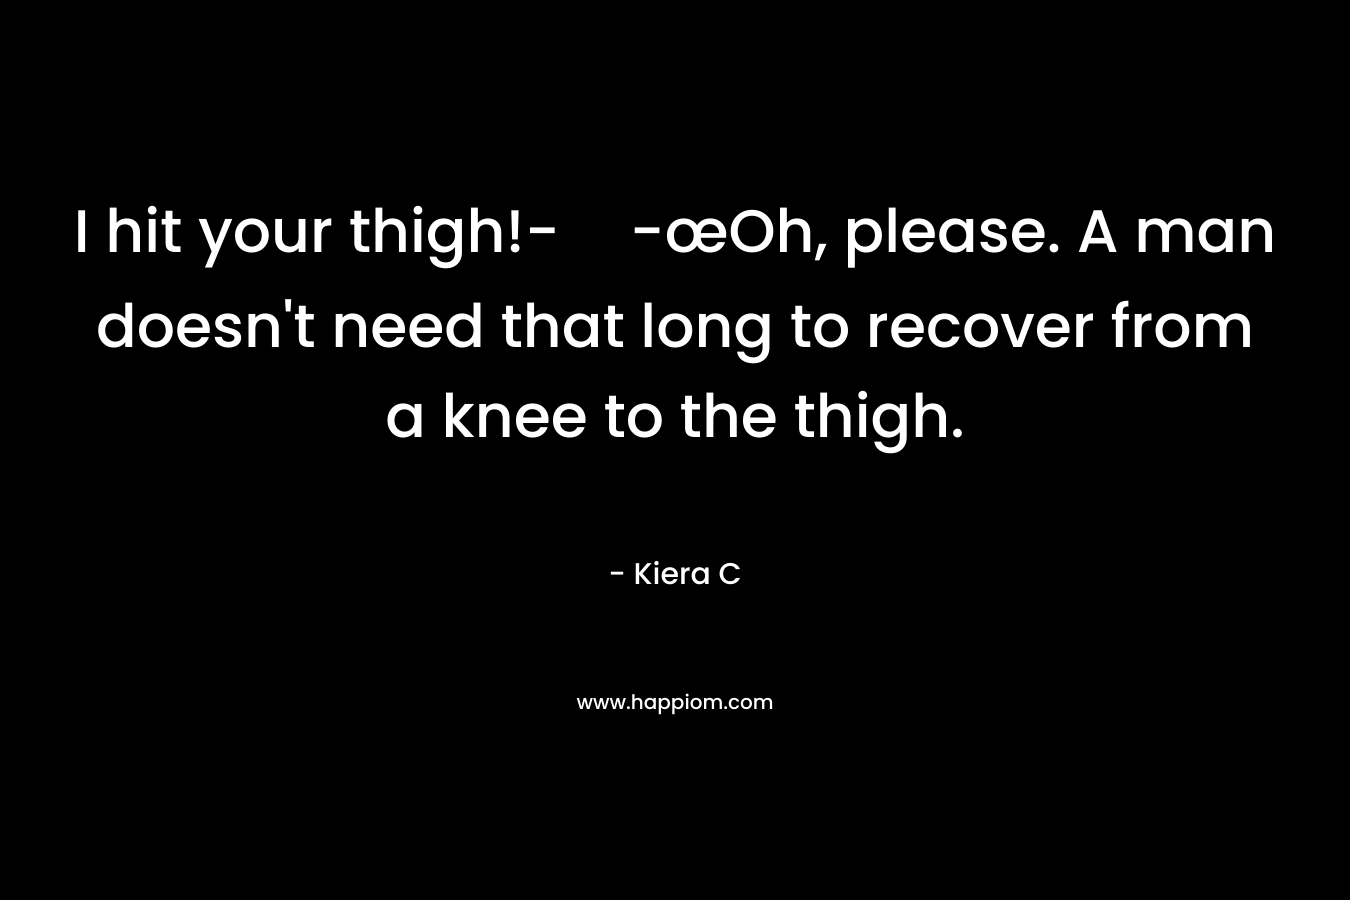 I hit your thigh!--œOh, please. A man doesn’t need that long to recover from a knee to the thigh. – Kiera C